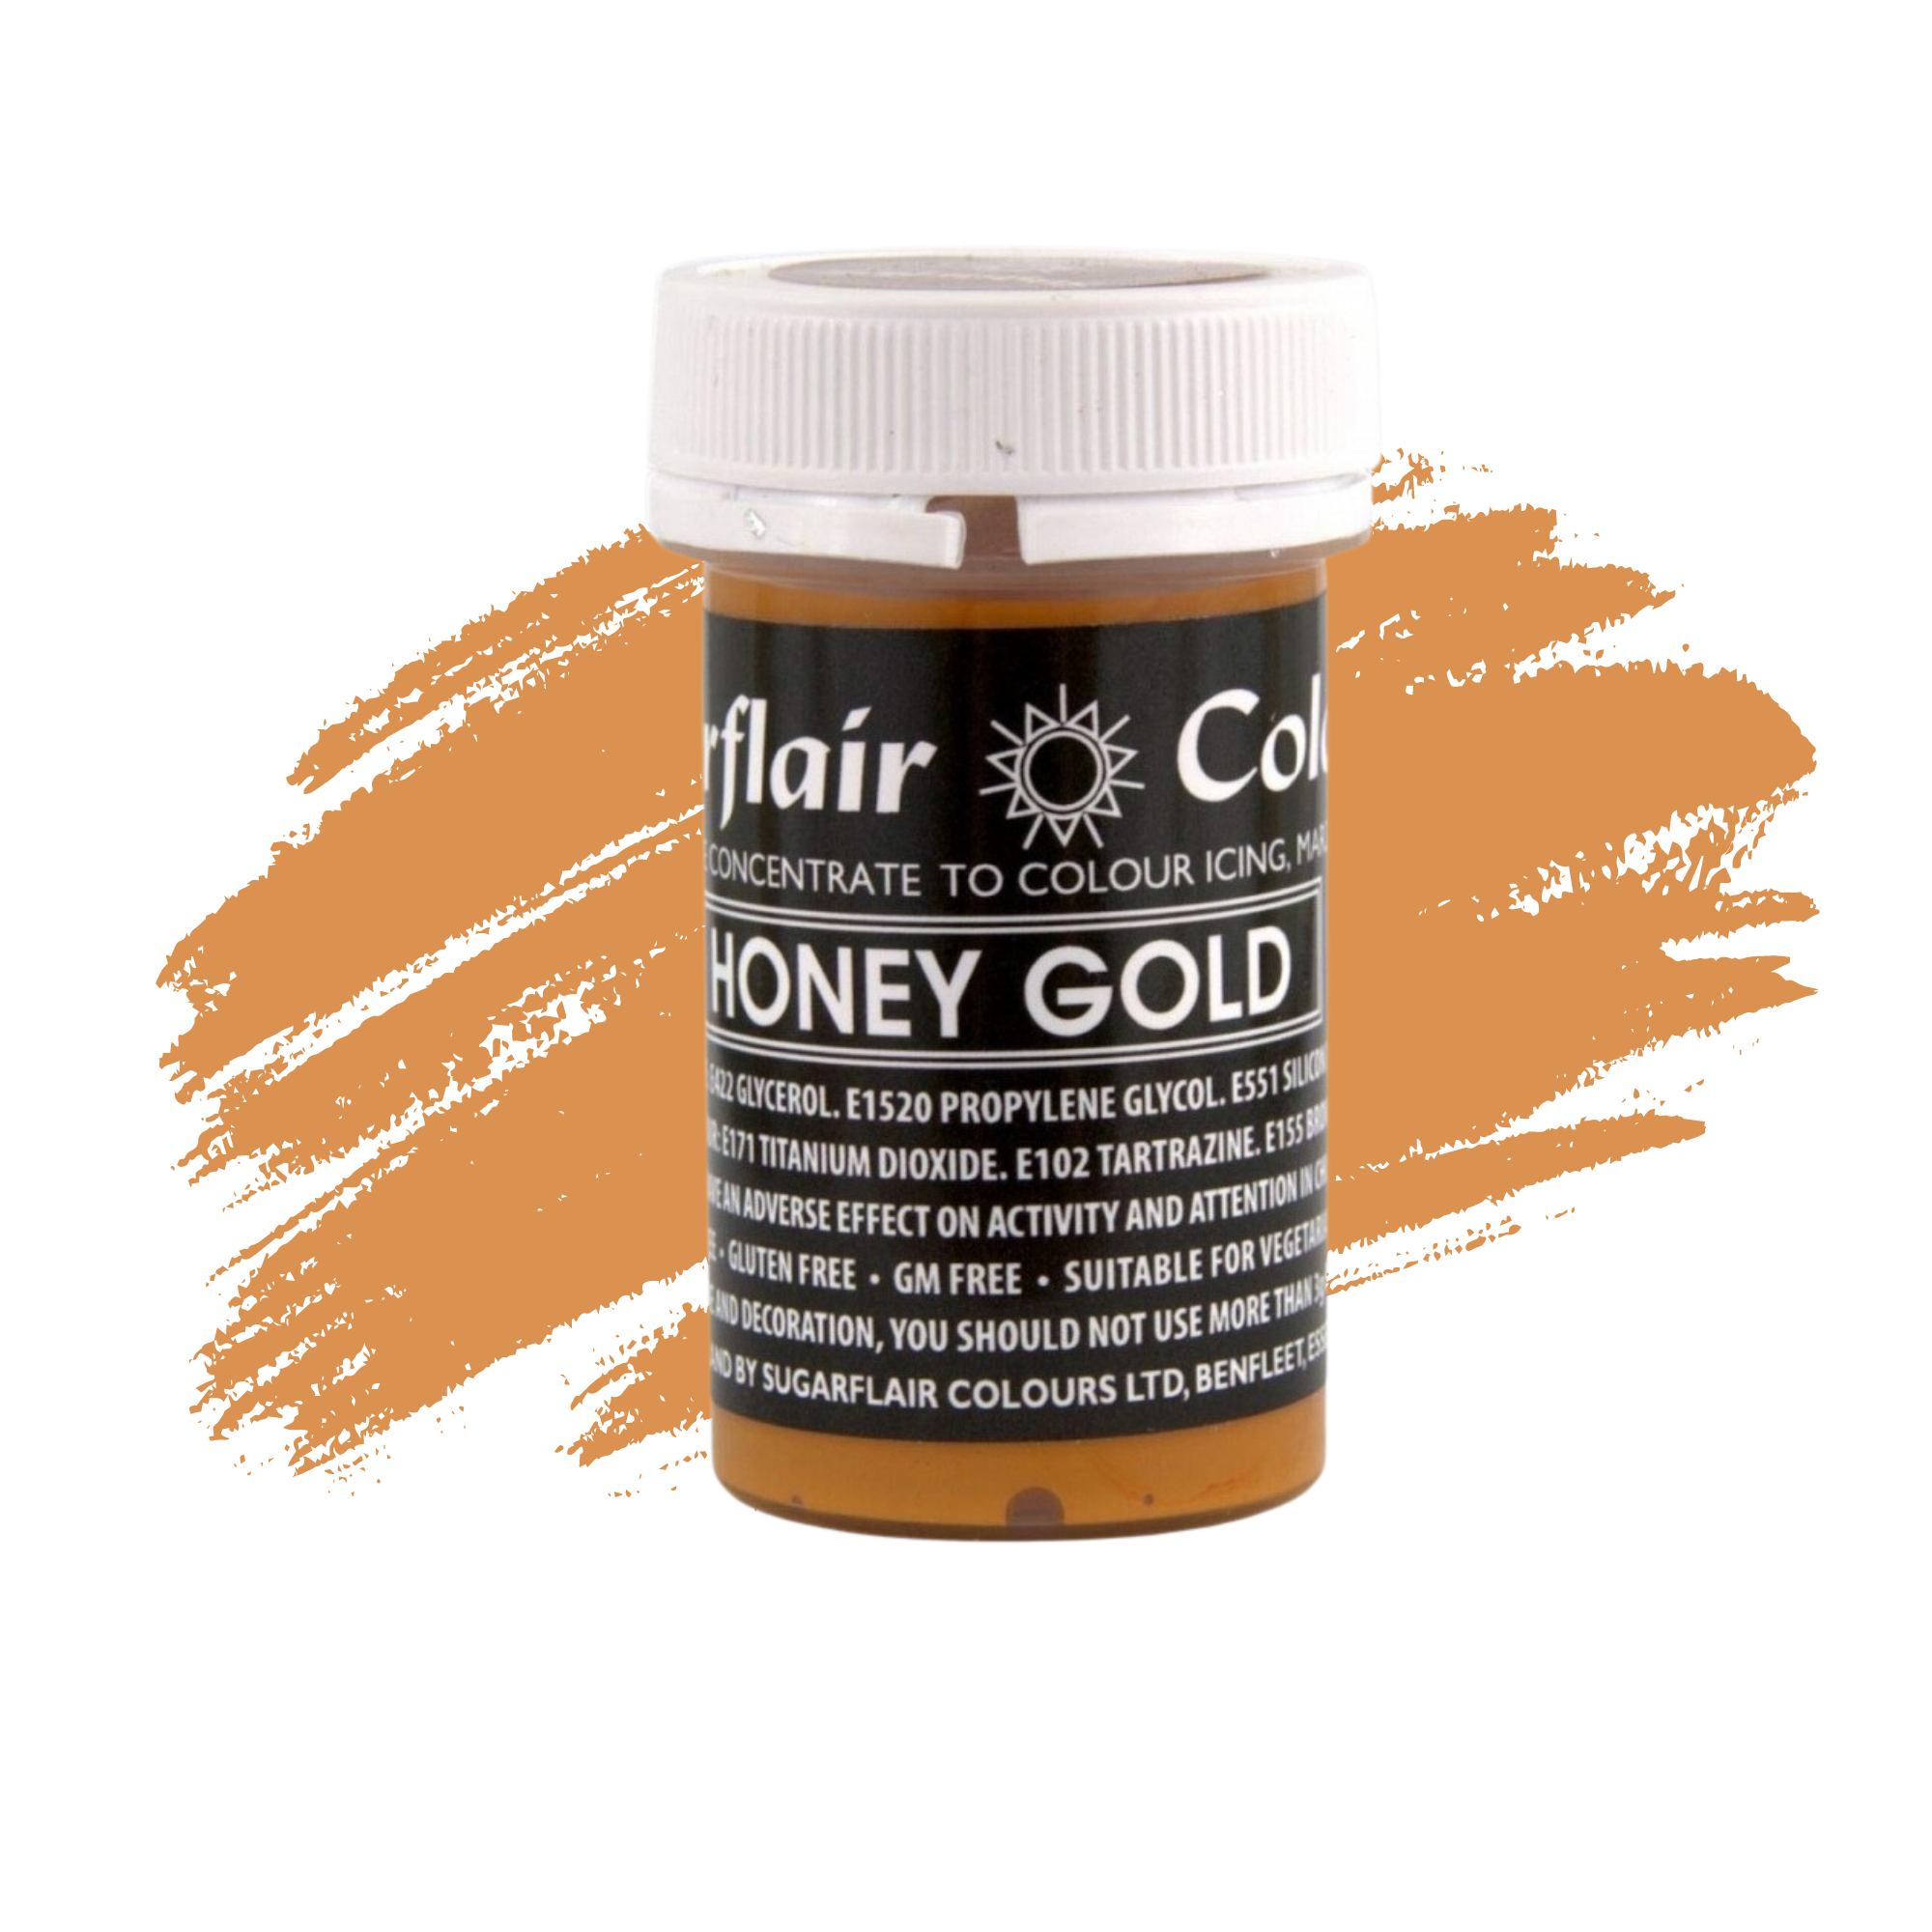 Sugarflair Paste Colours Concentrated Food Colouring - Pastel Honey Gold - 25g